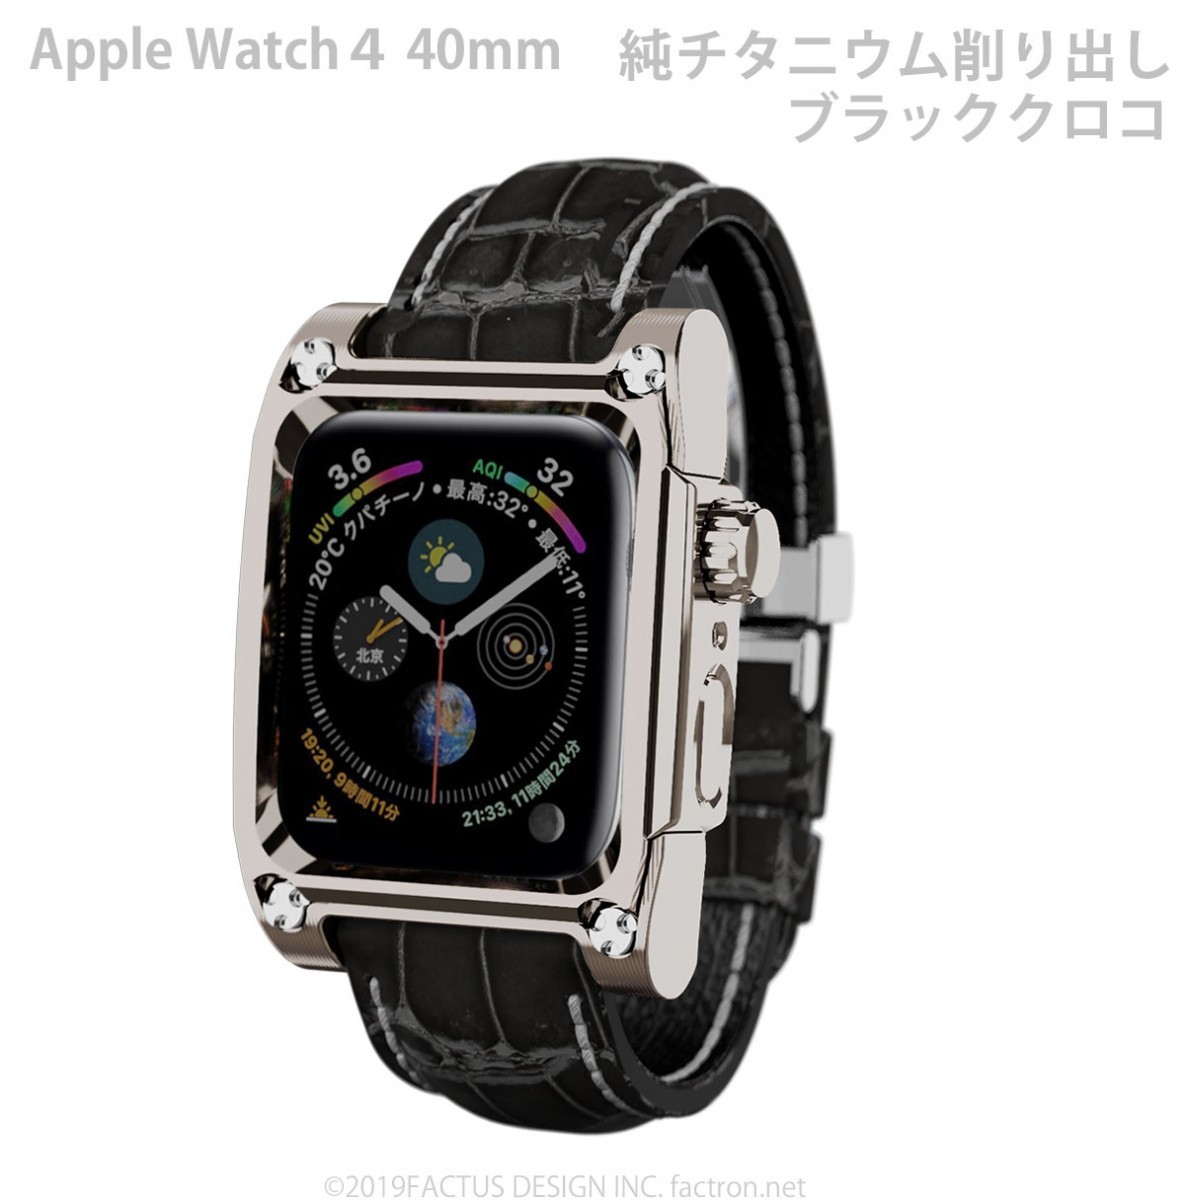  Apple watch 4&amp;5 for Novel for AppleWatch4 titanium case black black ko band Series4&amp;5 40mm exclusive use FA-W-031